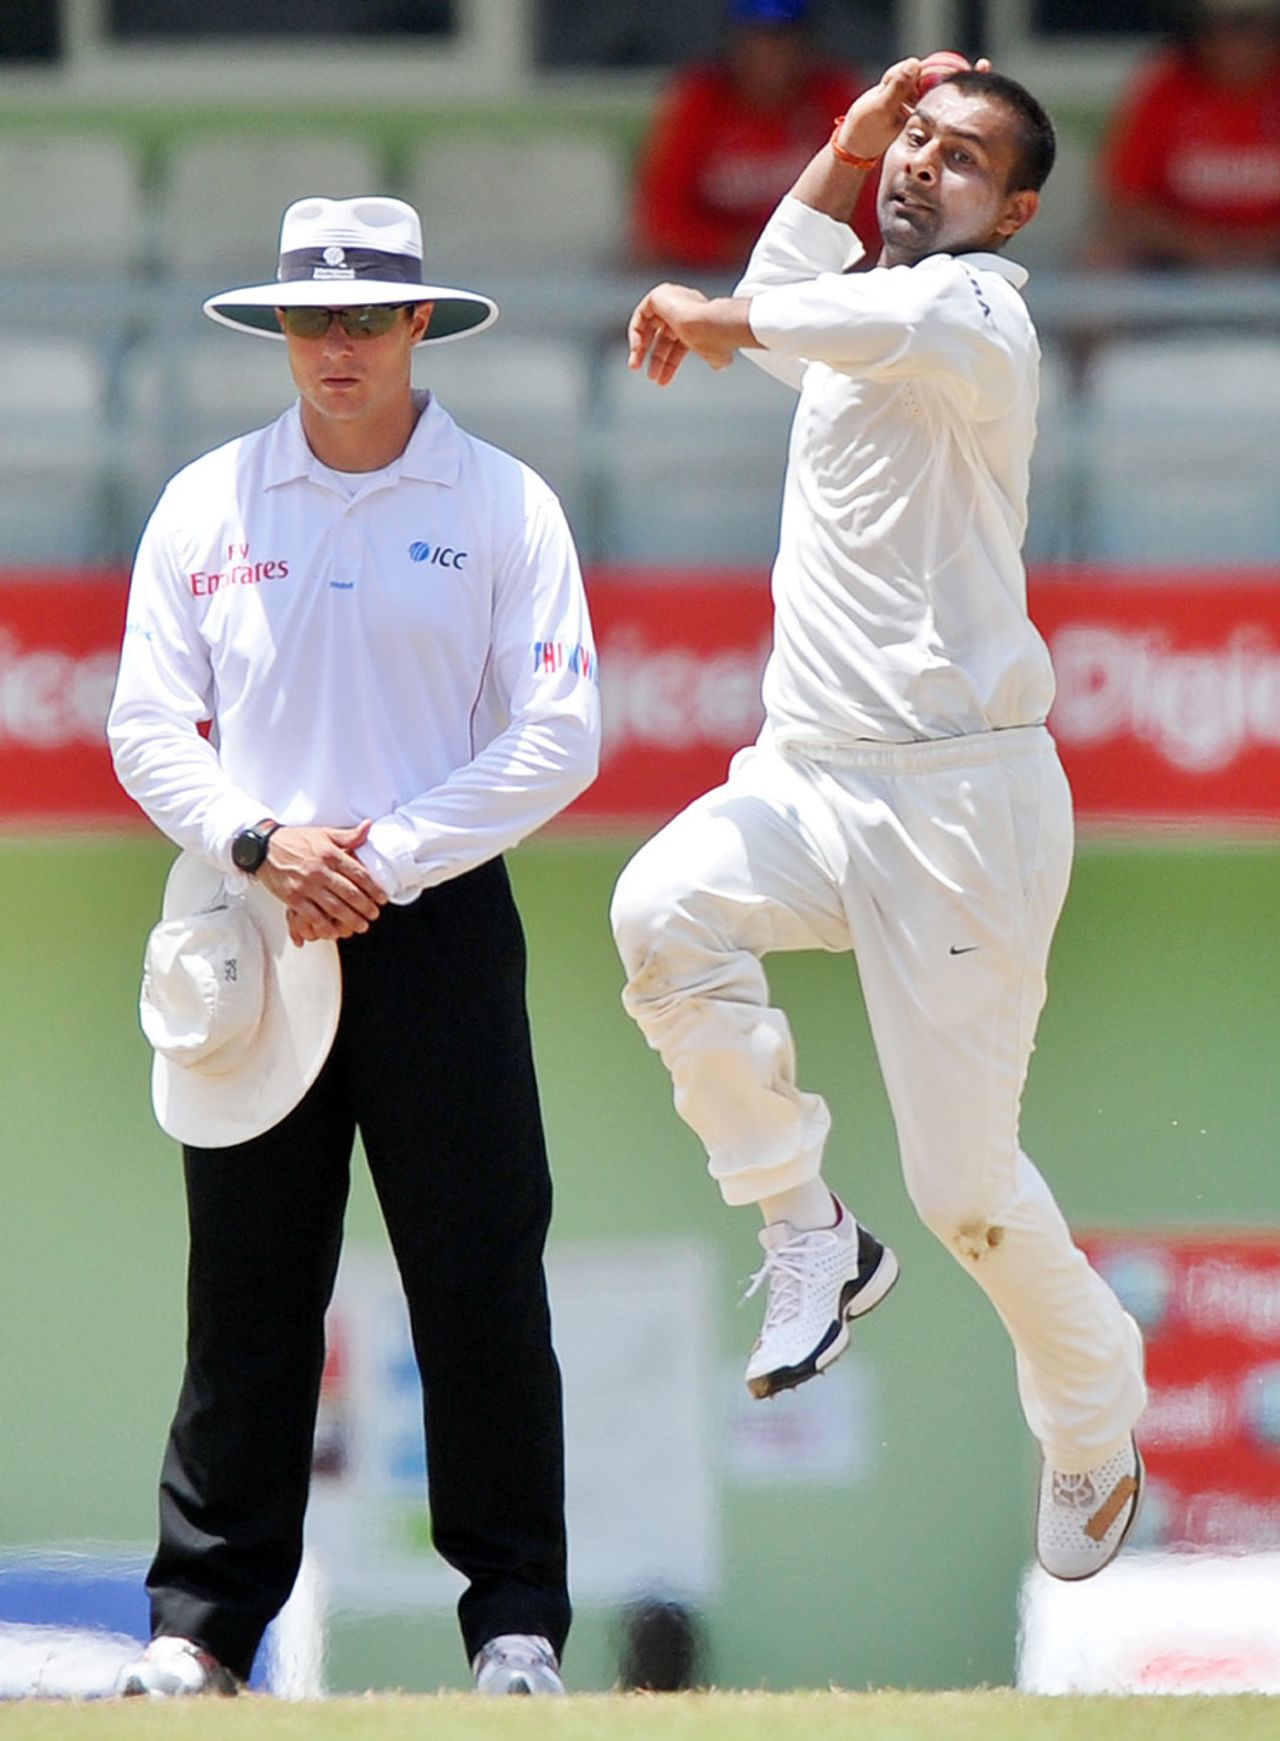 Praveen Kumar runs in to bowl as umpire Richard Kettleborough looks on, West Indies v India, 3rd Test, Dominica, 4th day, July 9, 2011